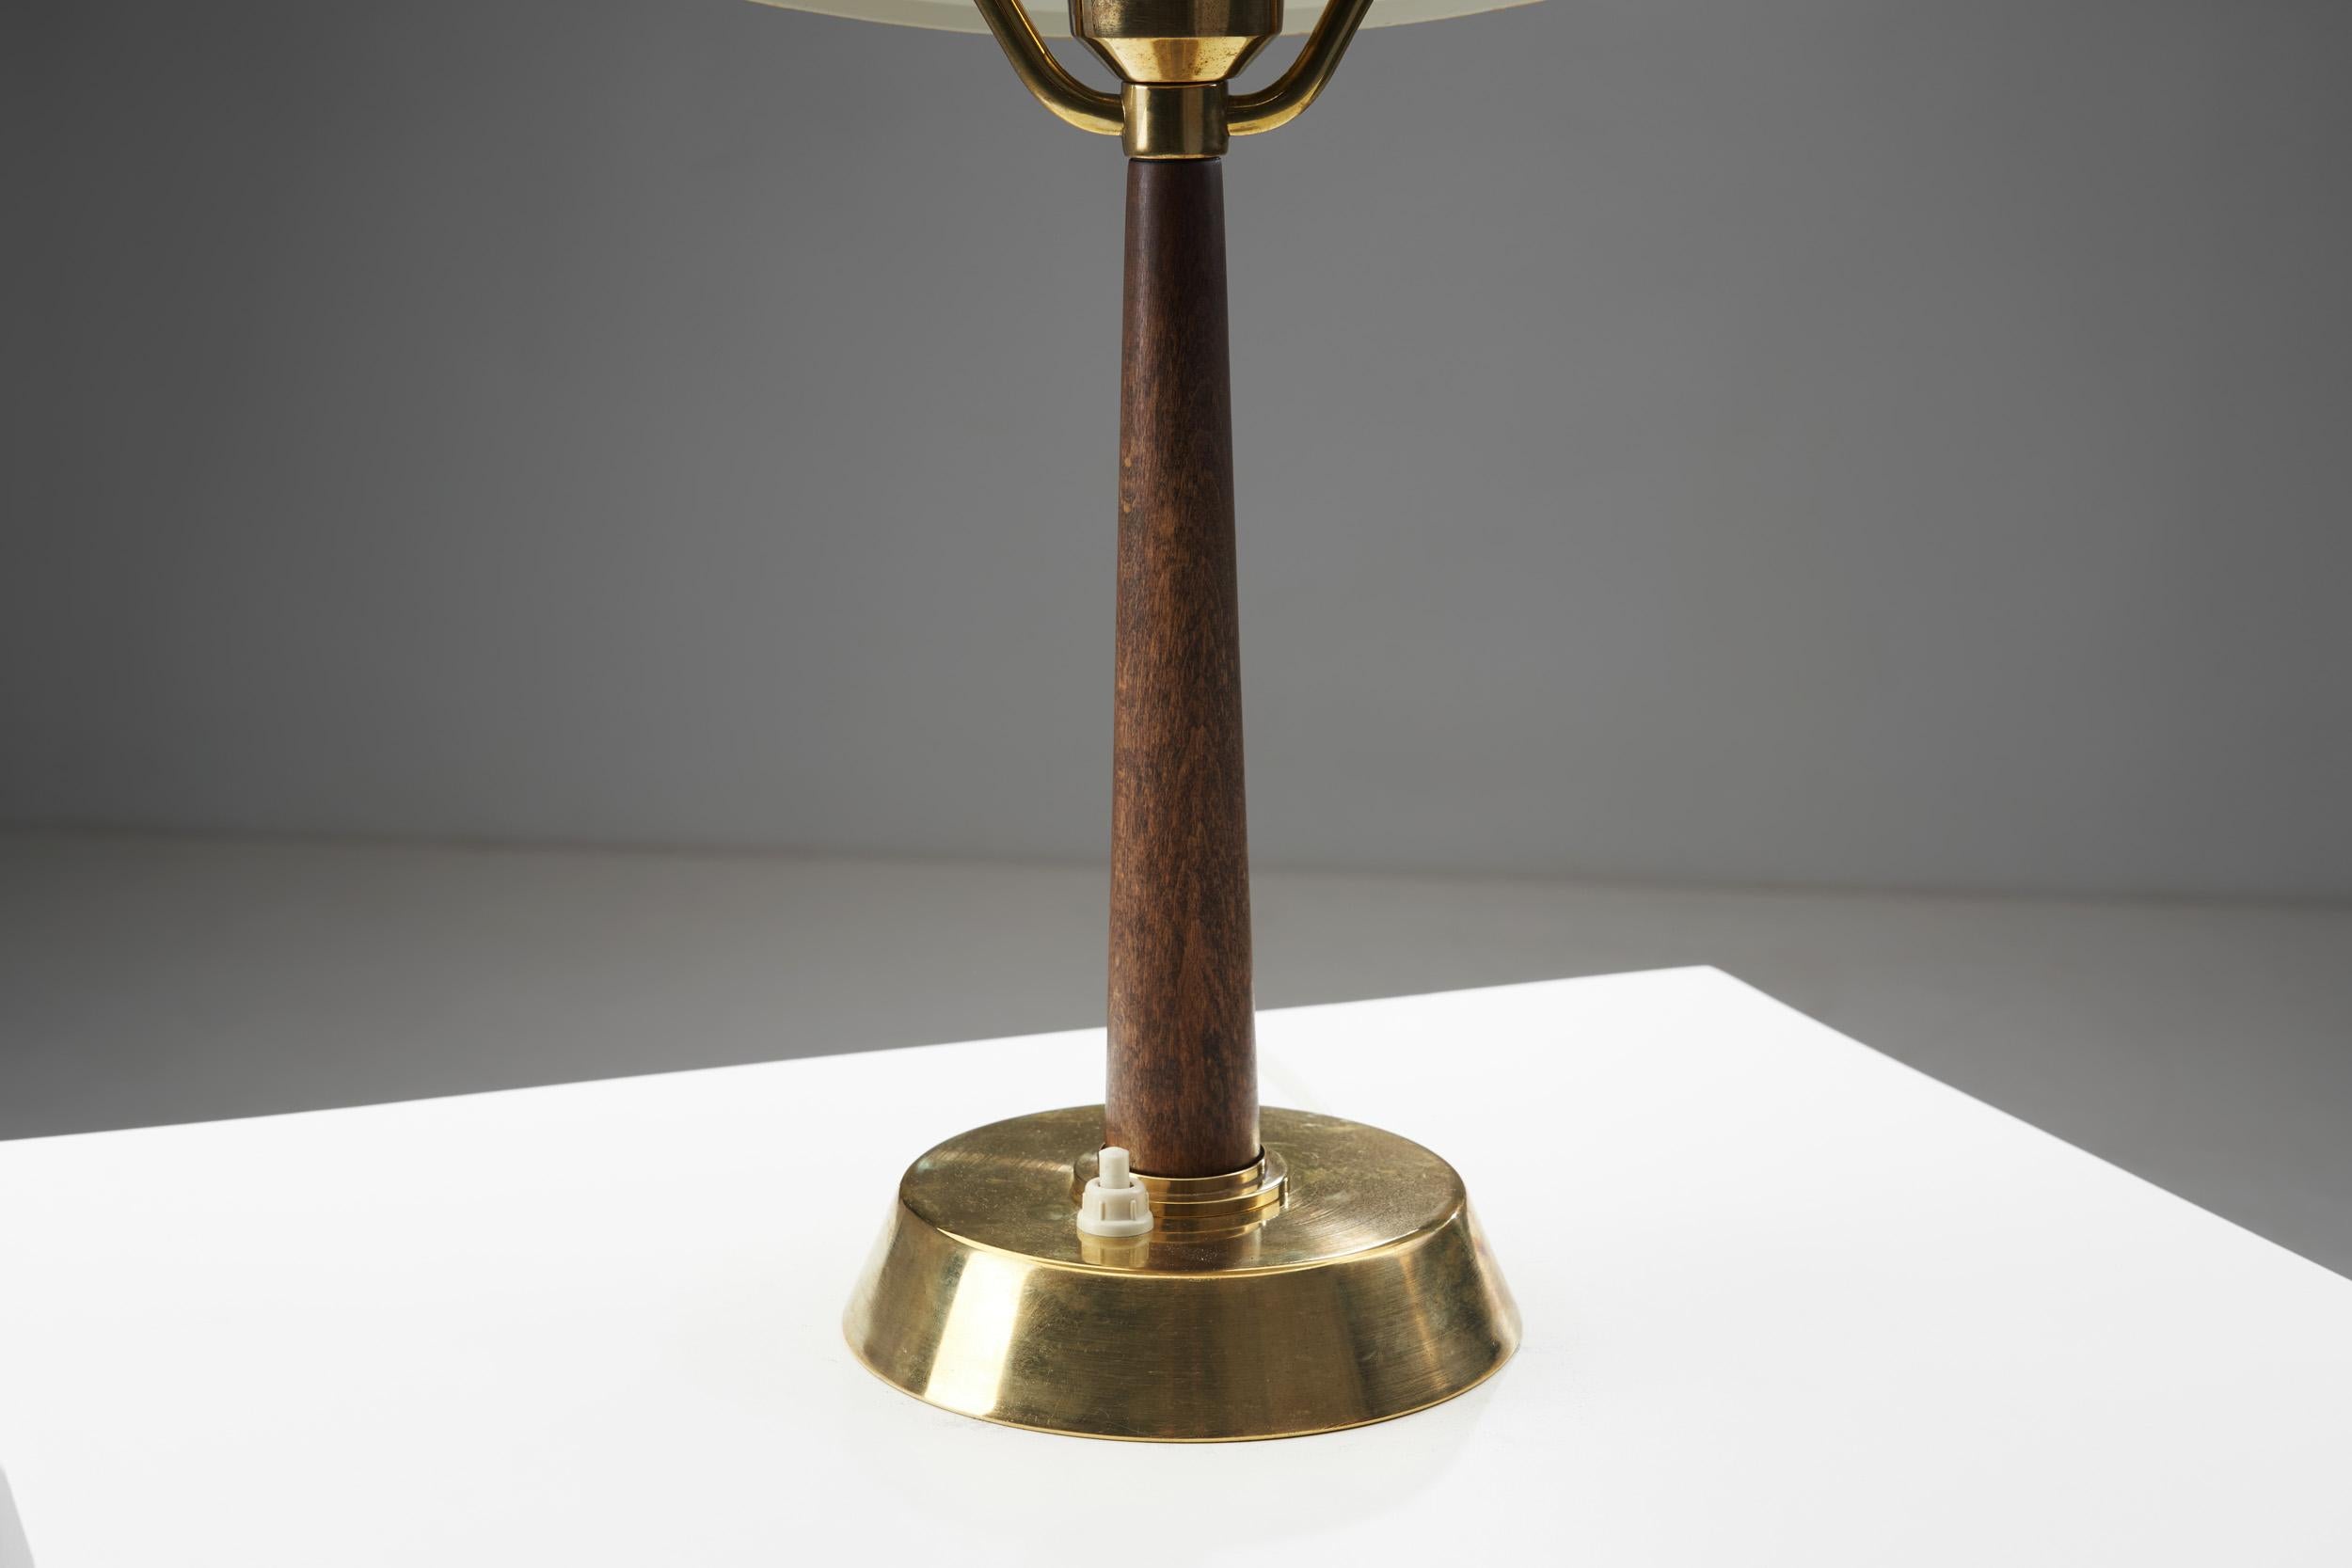 AB E. Hansson & Co. Brass Table Lamp with Adjustable Shade, Sweden 1950s For Sale 7